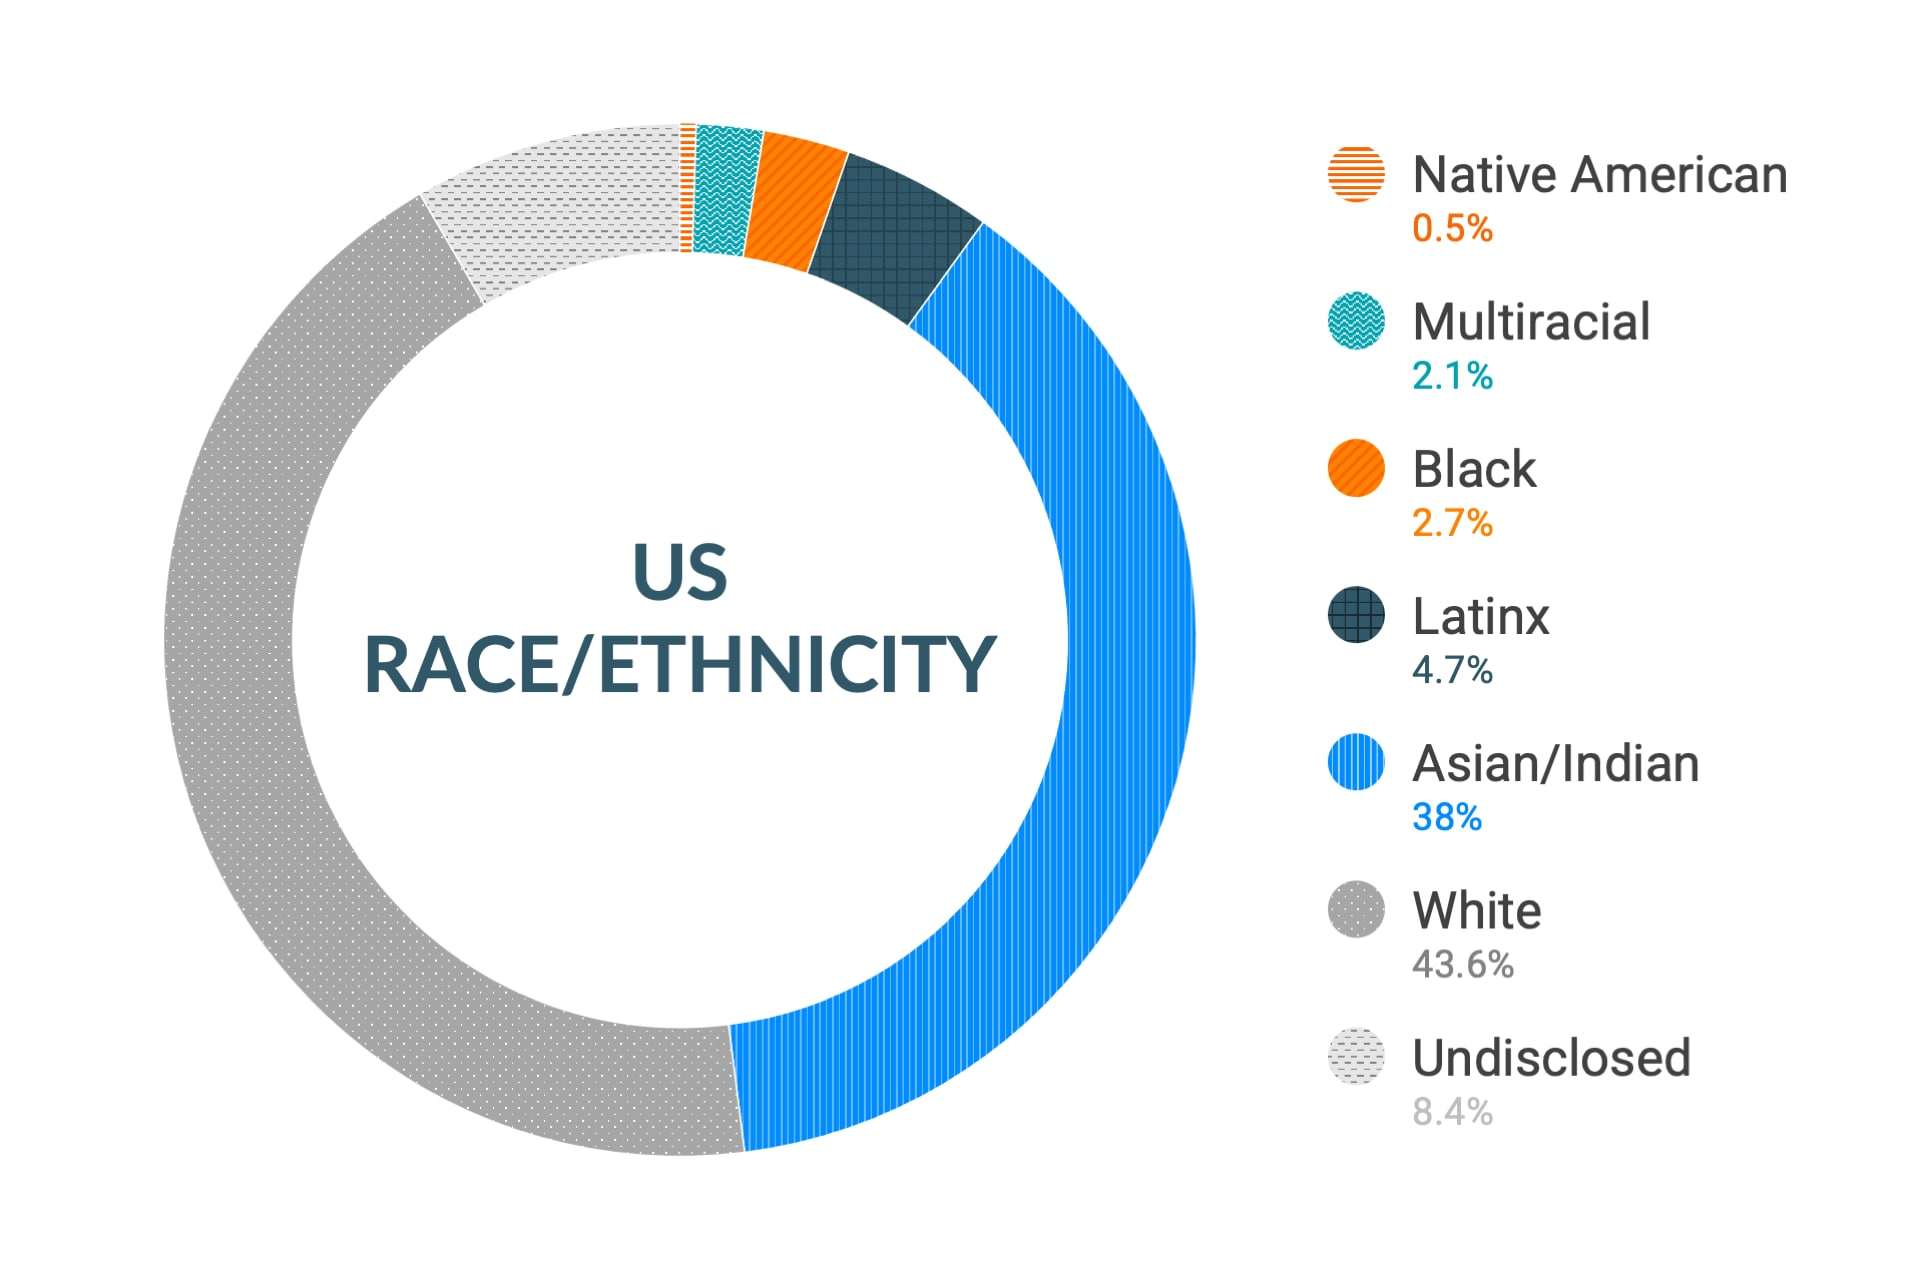 Cloudera Diversity and Inclusion data for U.S. Race and Ethnicity: Native American 0.5%, Multiracial 2.3%, Black 3.7%, Latinx 5.0%, Asian and Indian 35.6%, White 45%, Undisclosed 7.9%